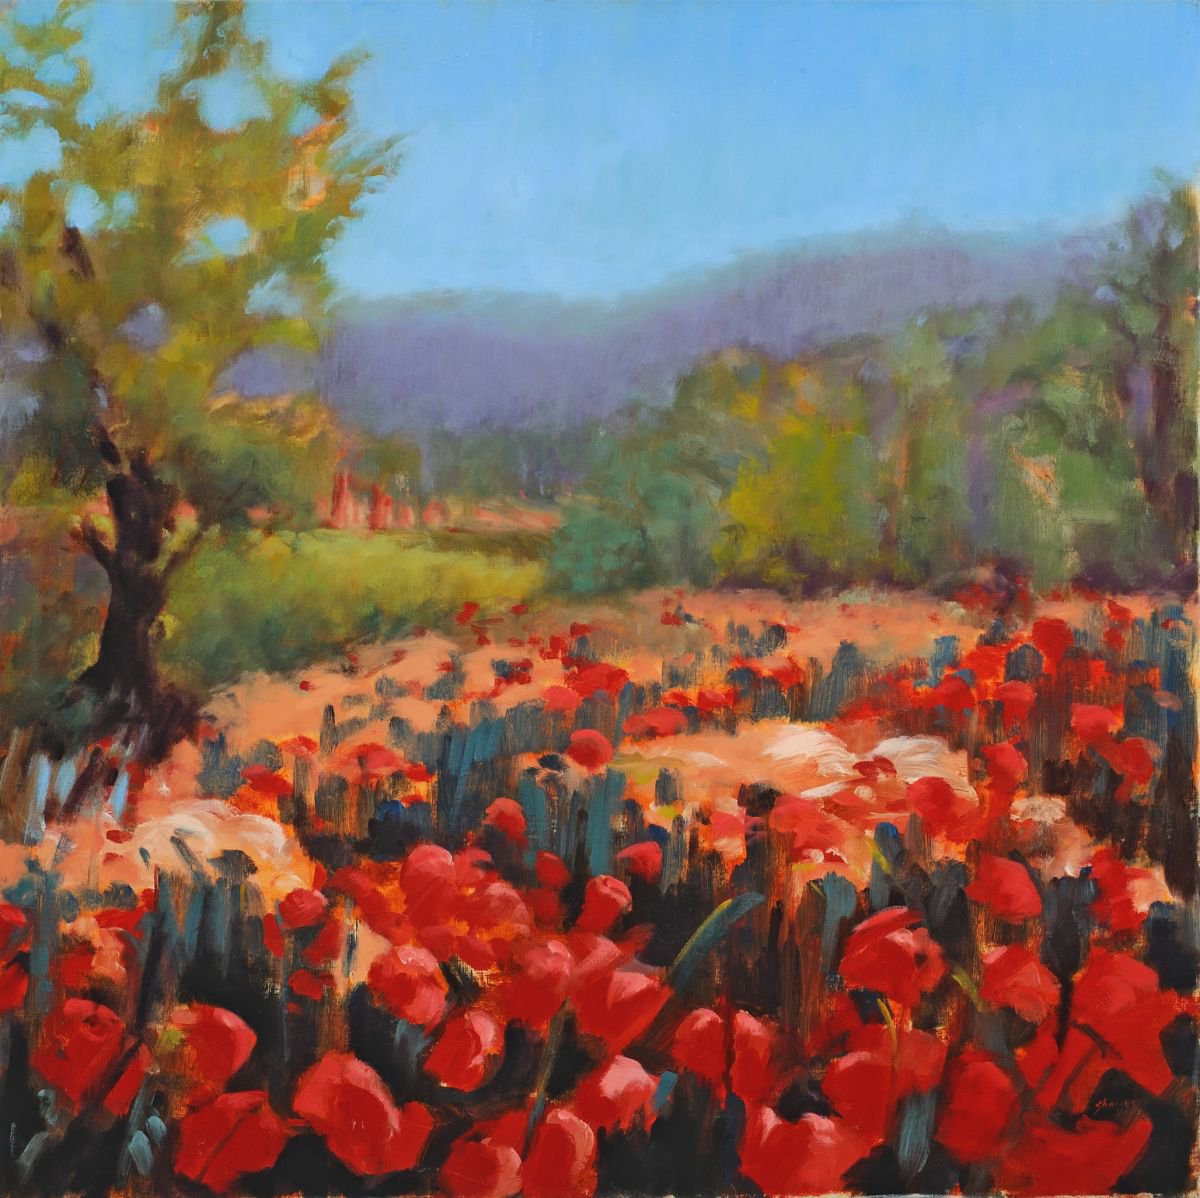 DANCE OF THE POPPIES by Shanee Uberman